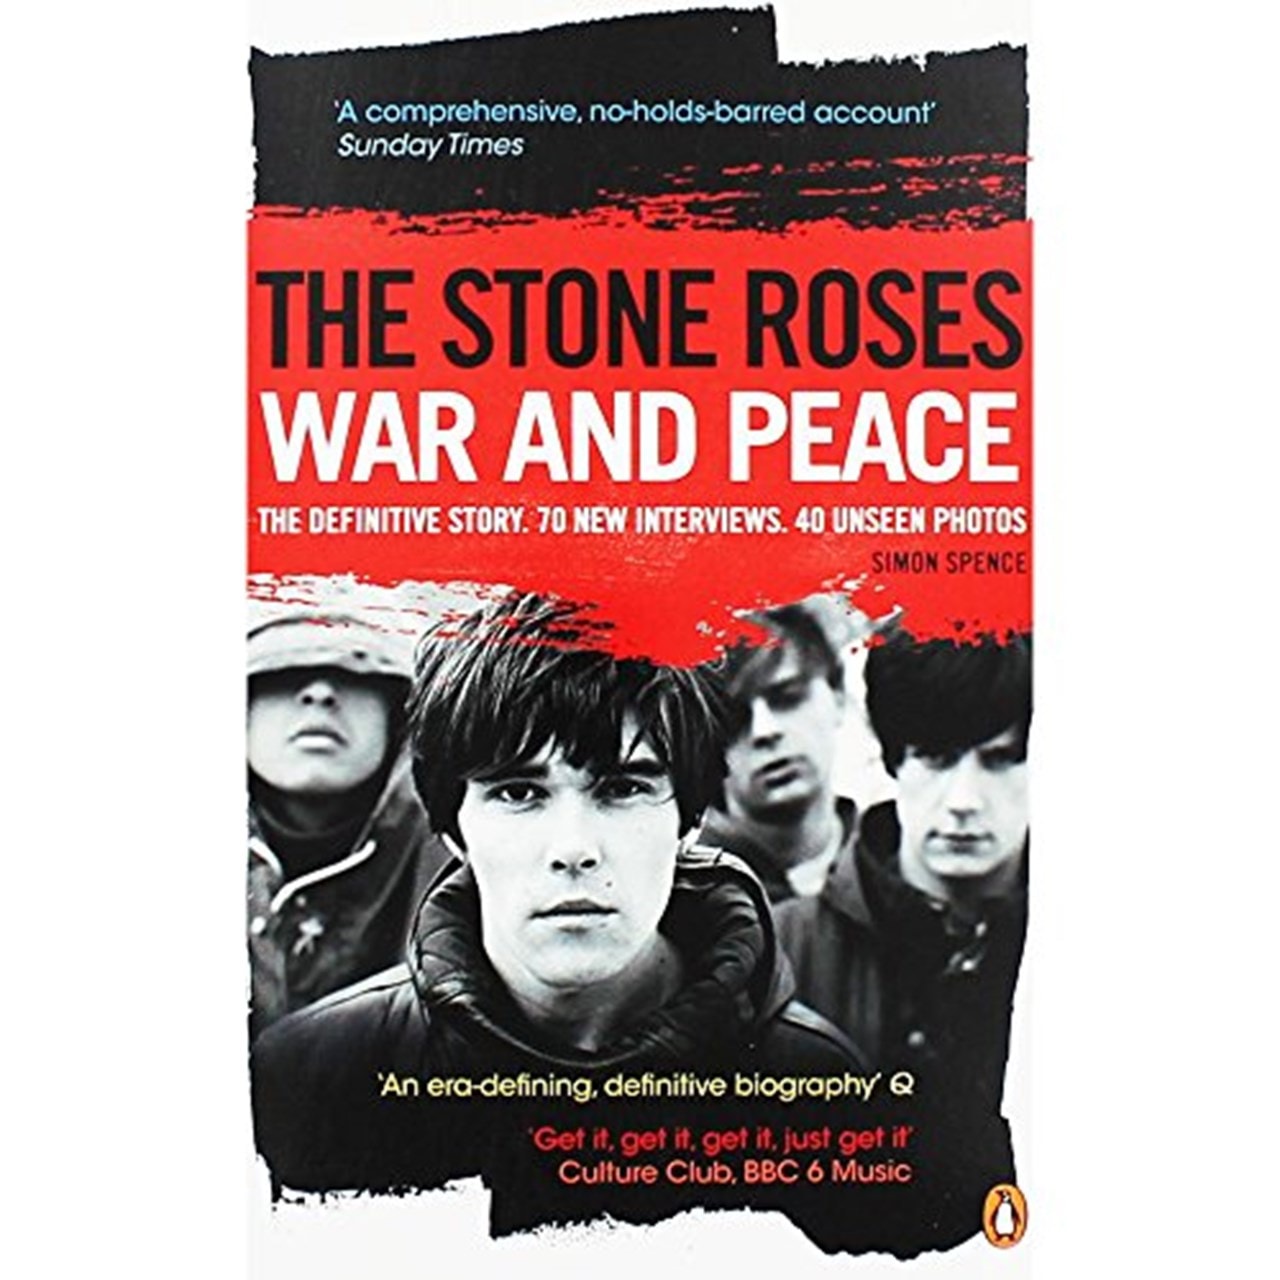 The Stone Roses War And Peace Books Free Shipping Over 20 Hmv Store